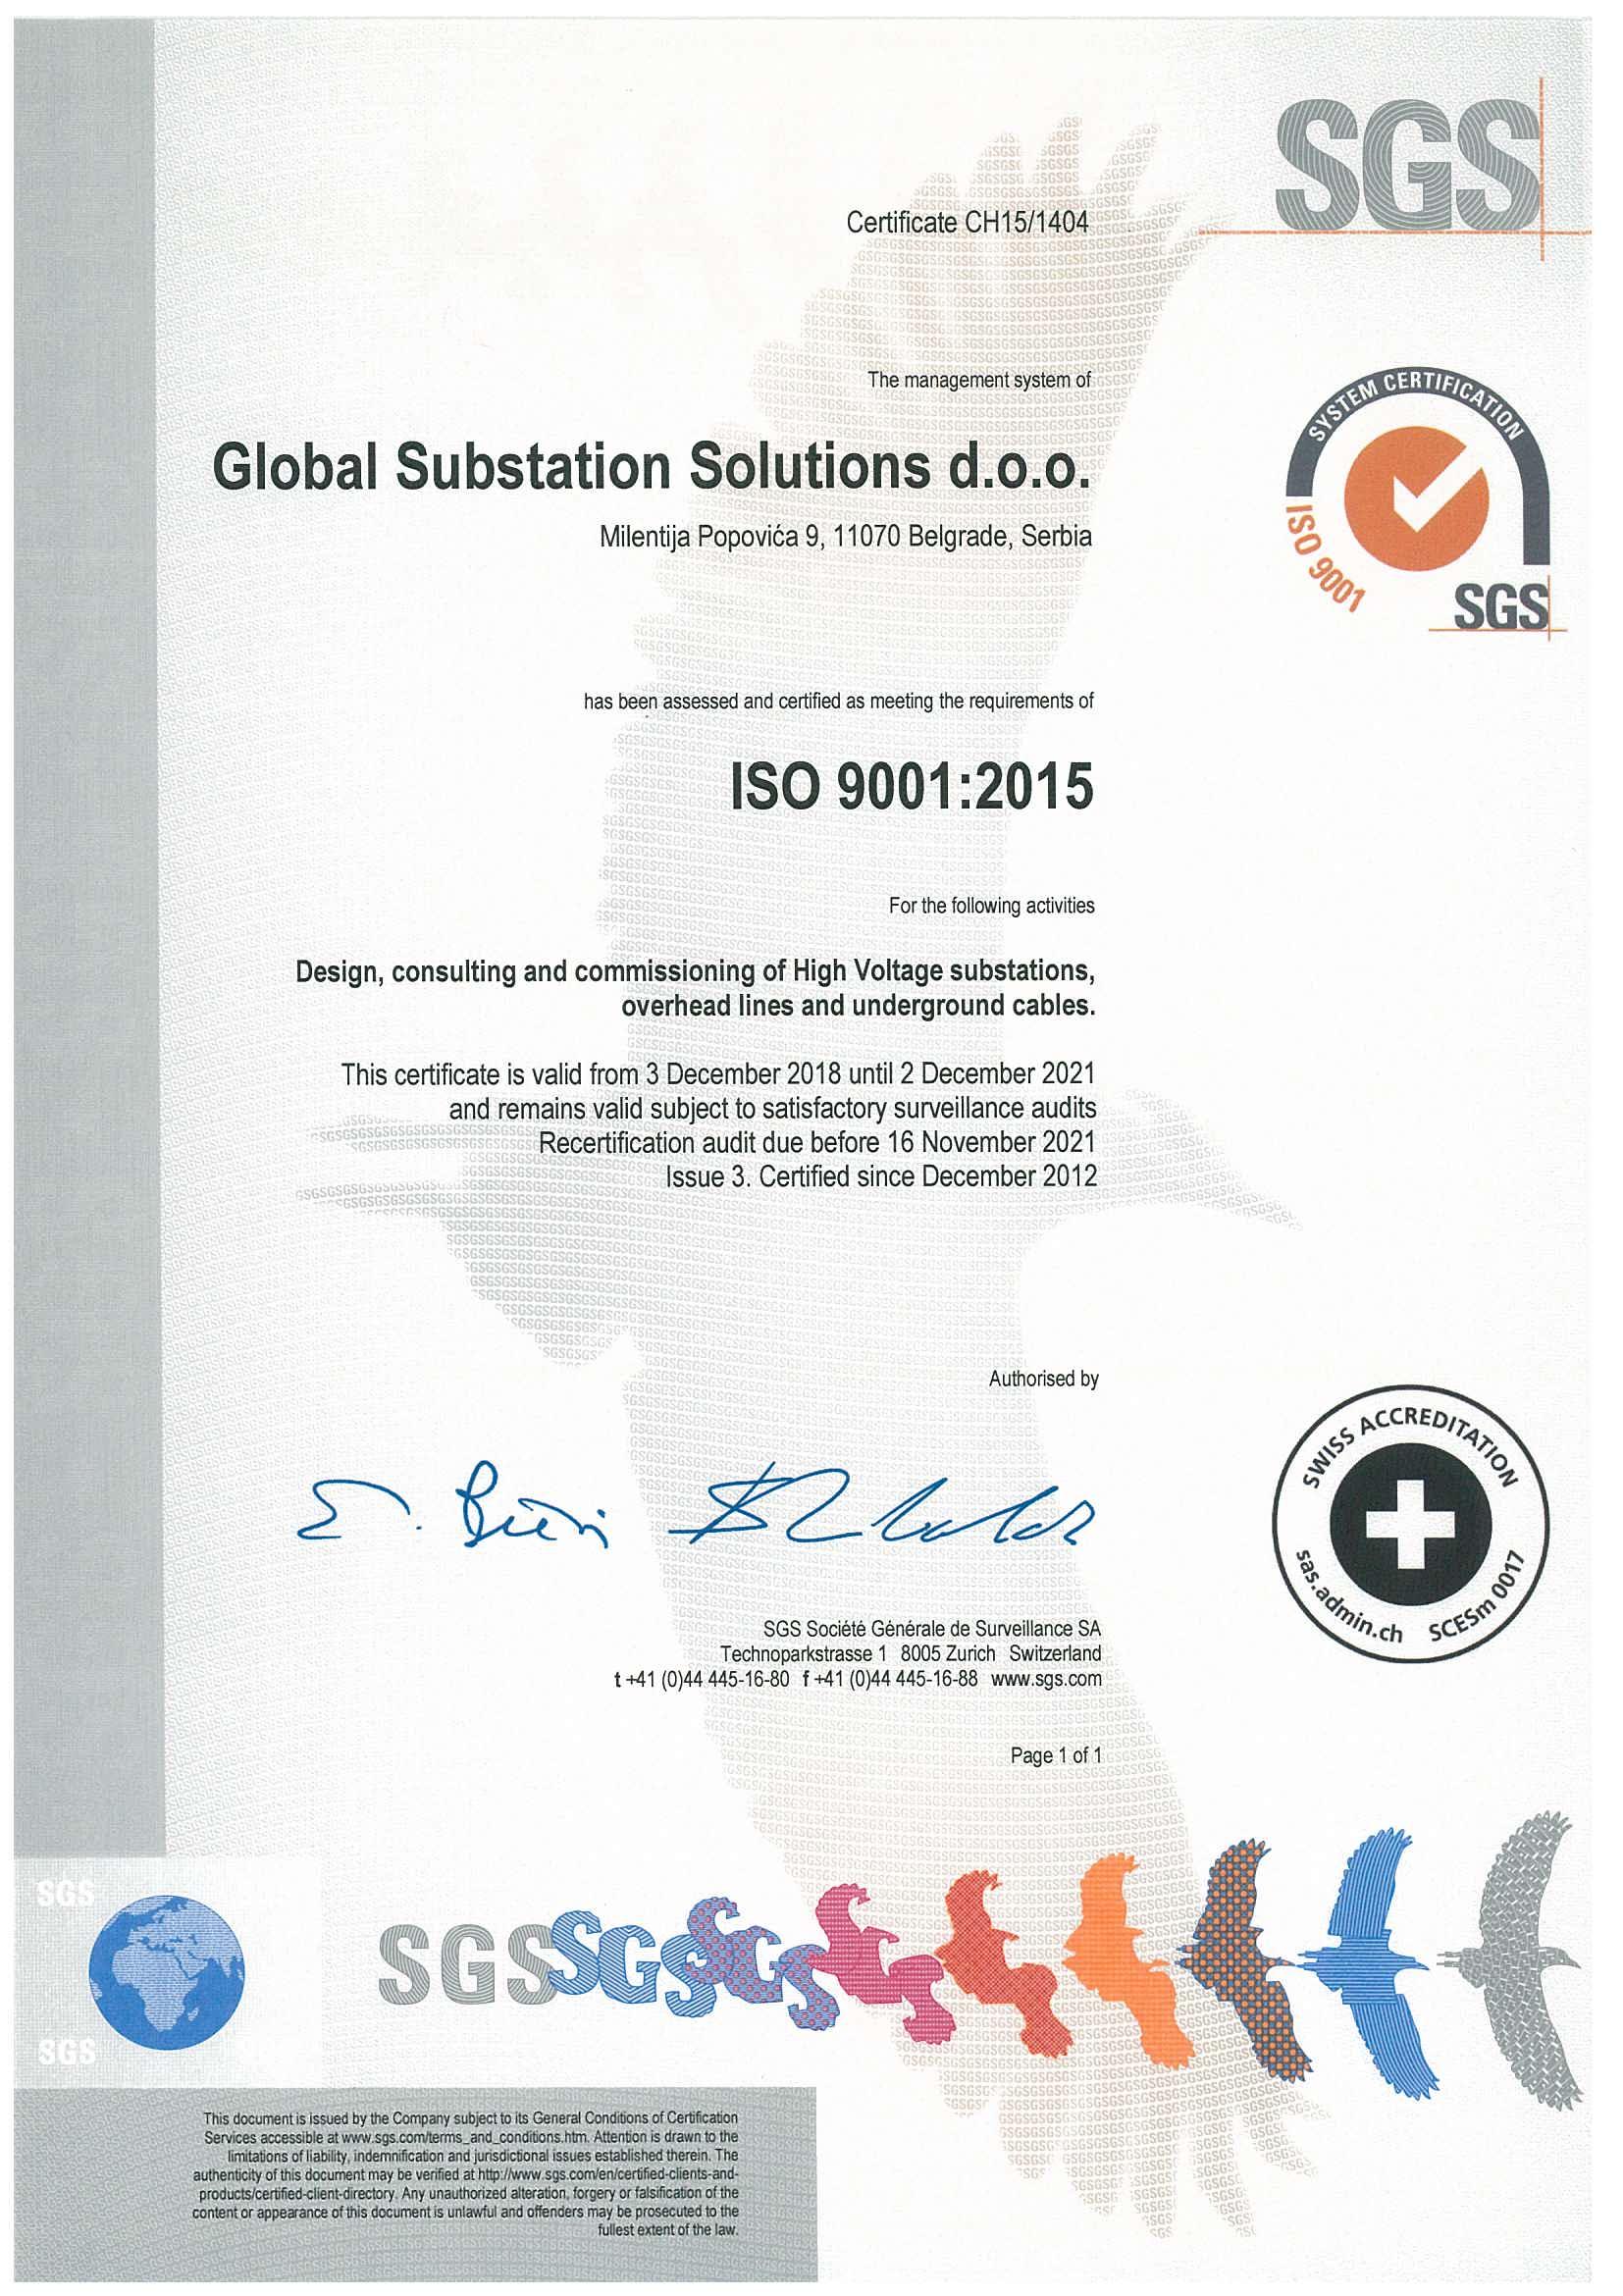 ISO_9001_2008